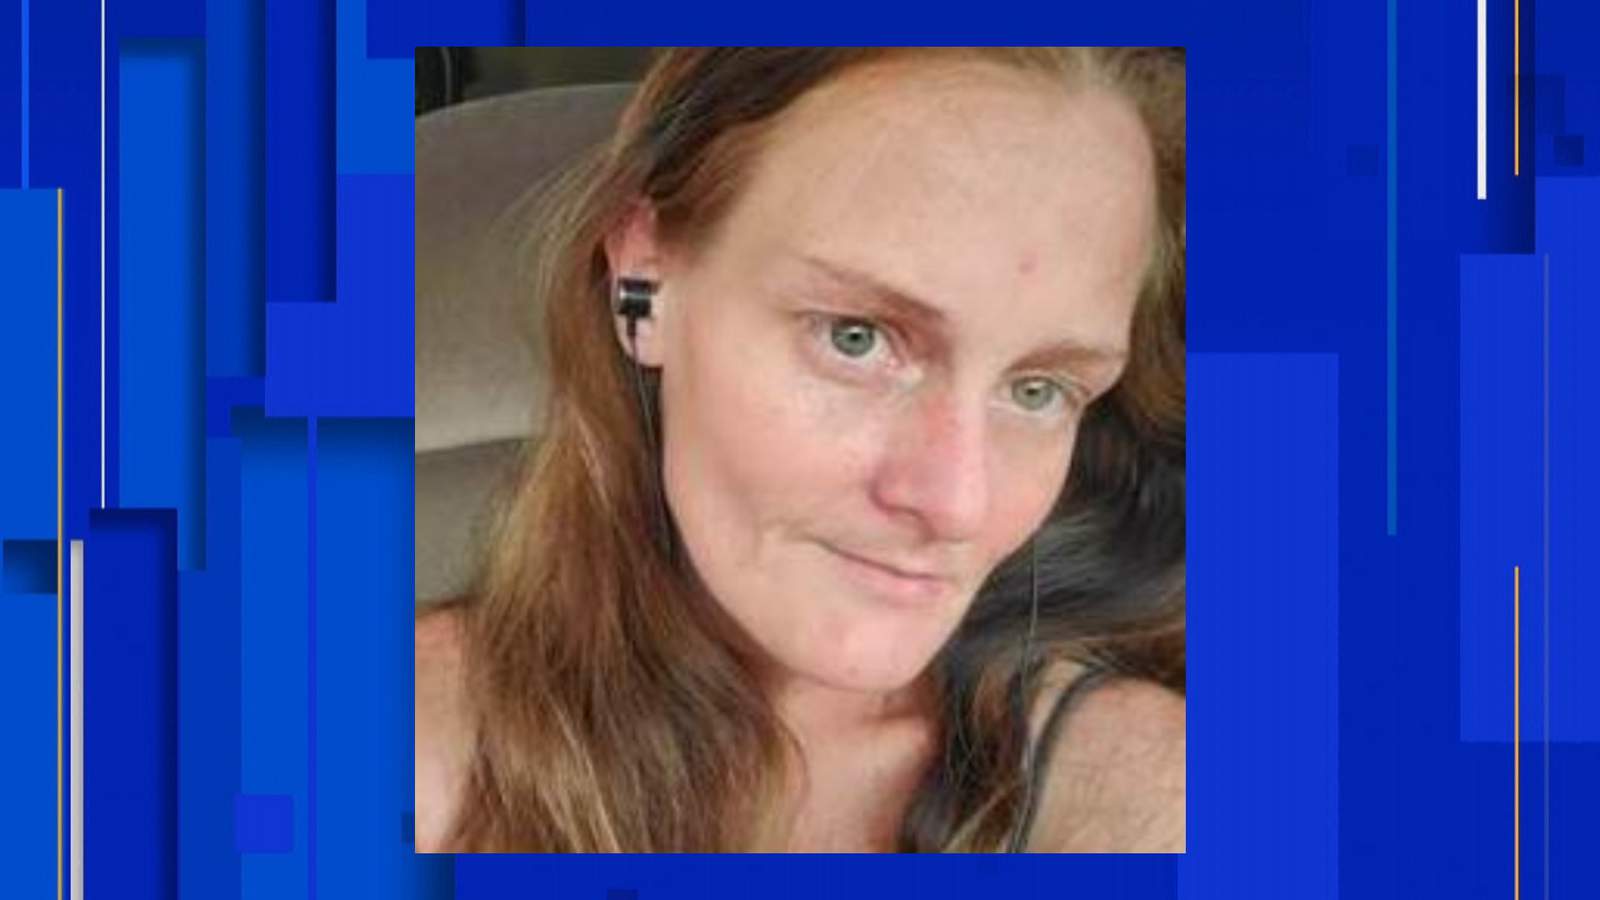 Marion County deputies concerned for missing woman’s safety after unknown person answers her phone